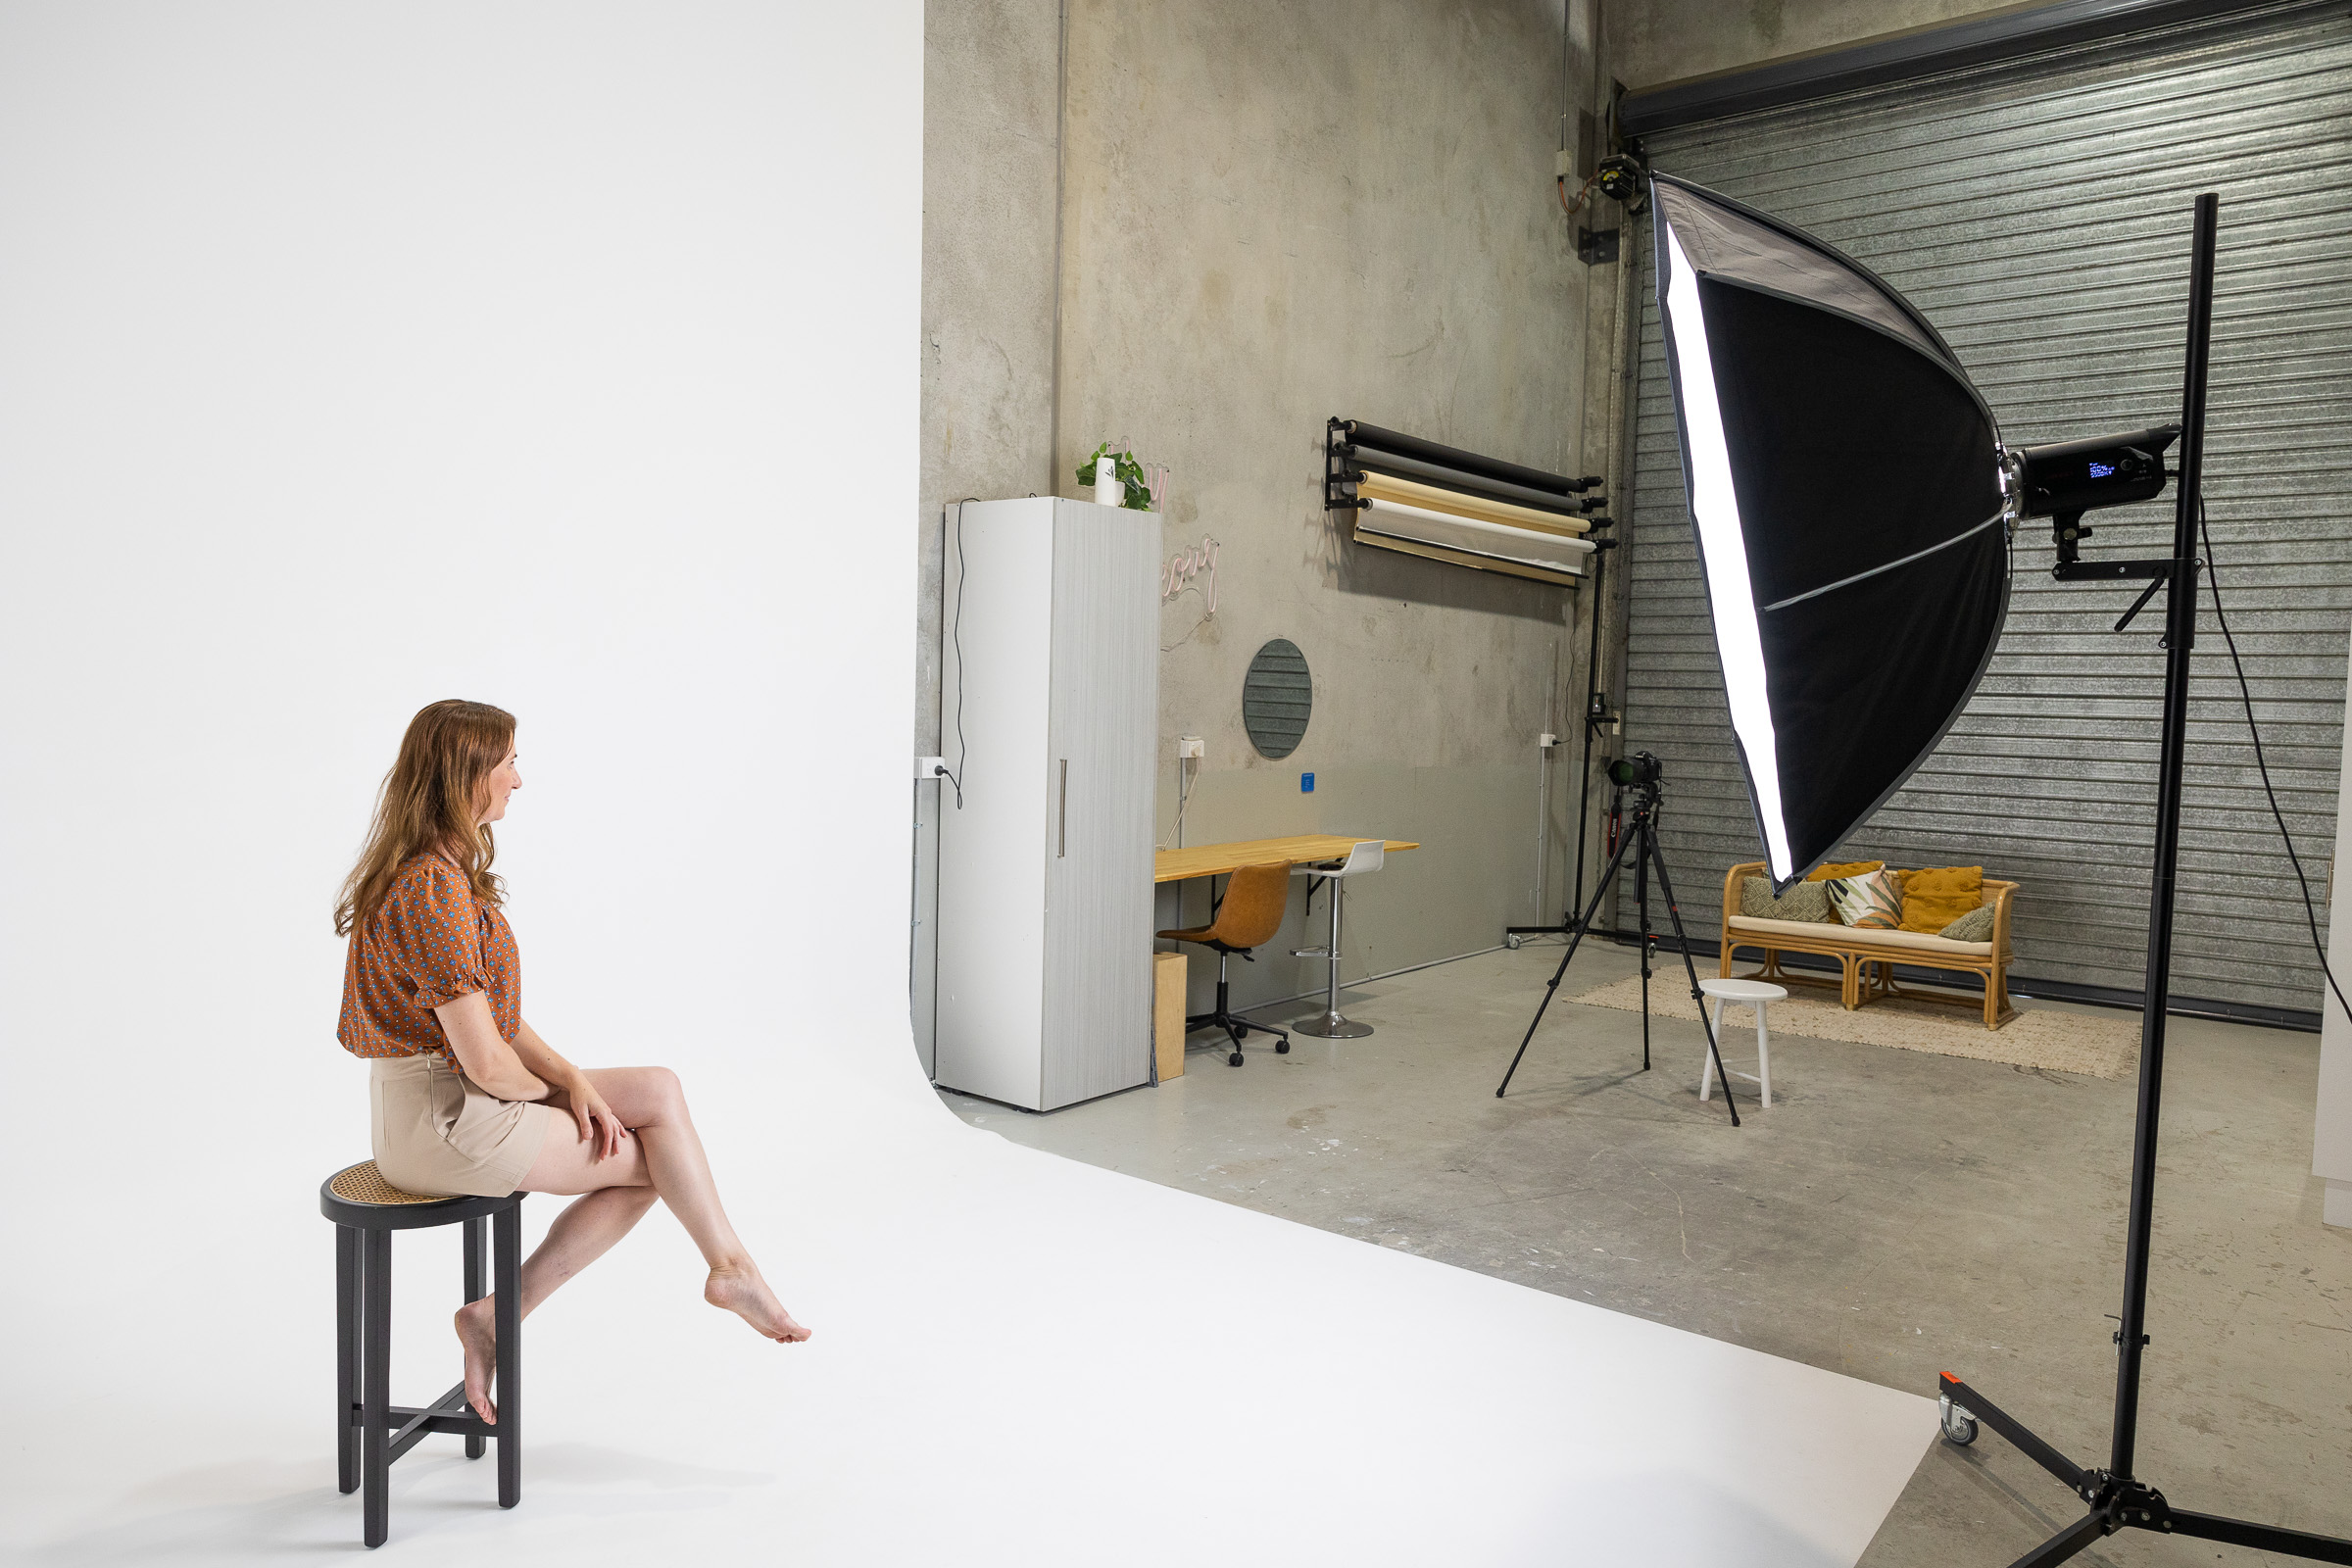 image shows full length of brilliant white hire studio with white corner cyclorama and large soft box lighting, production desk, paper backdrop system and client seating.